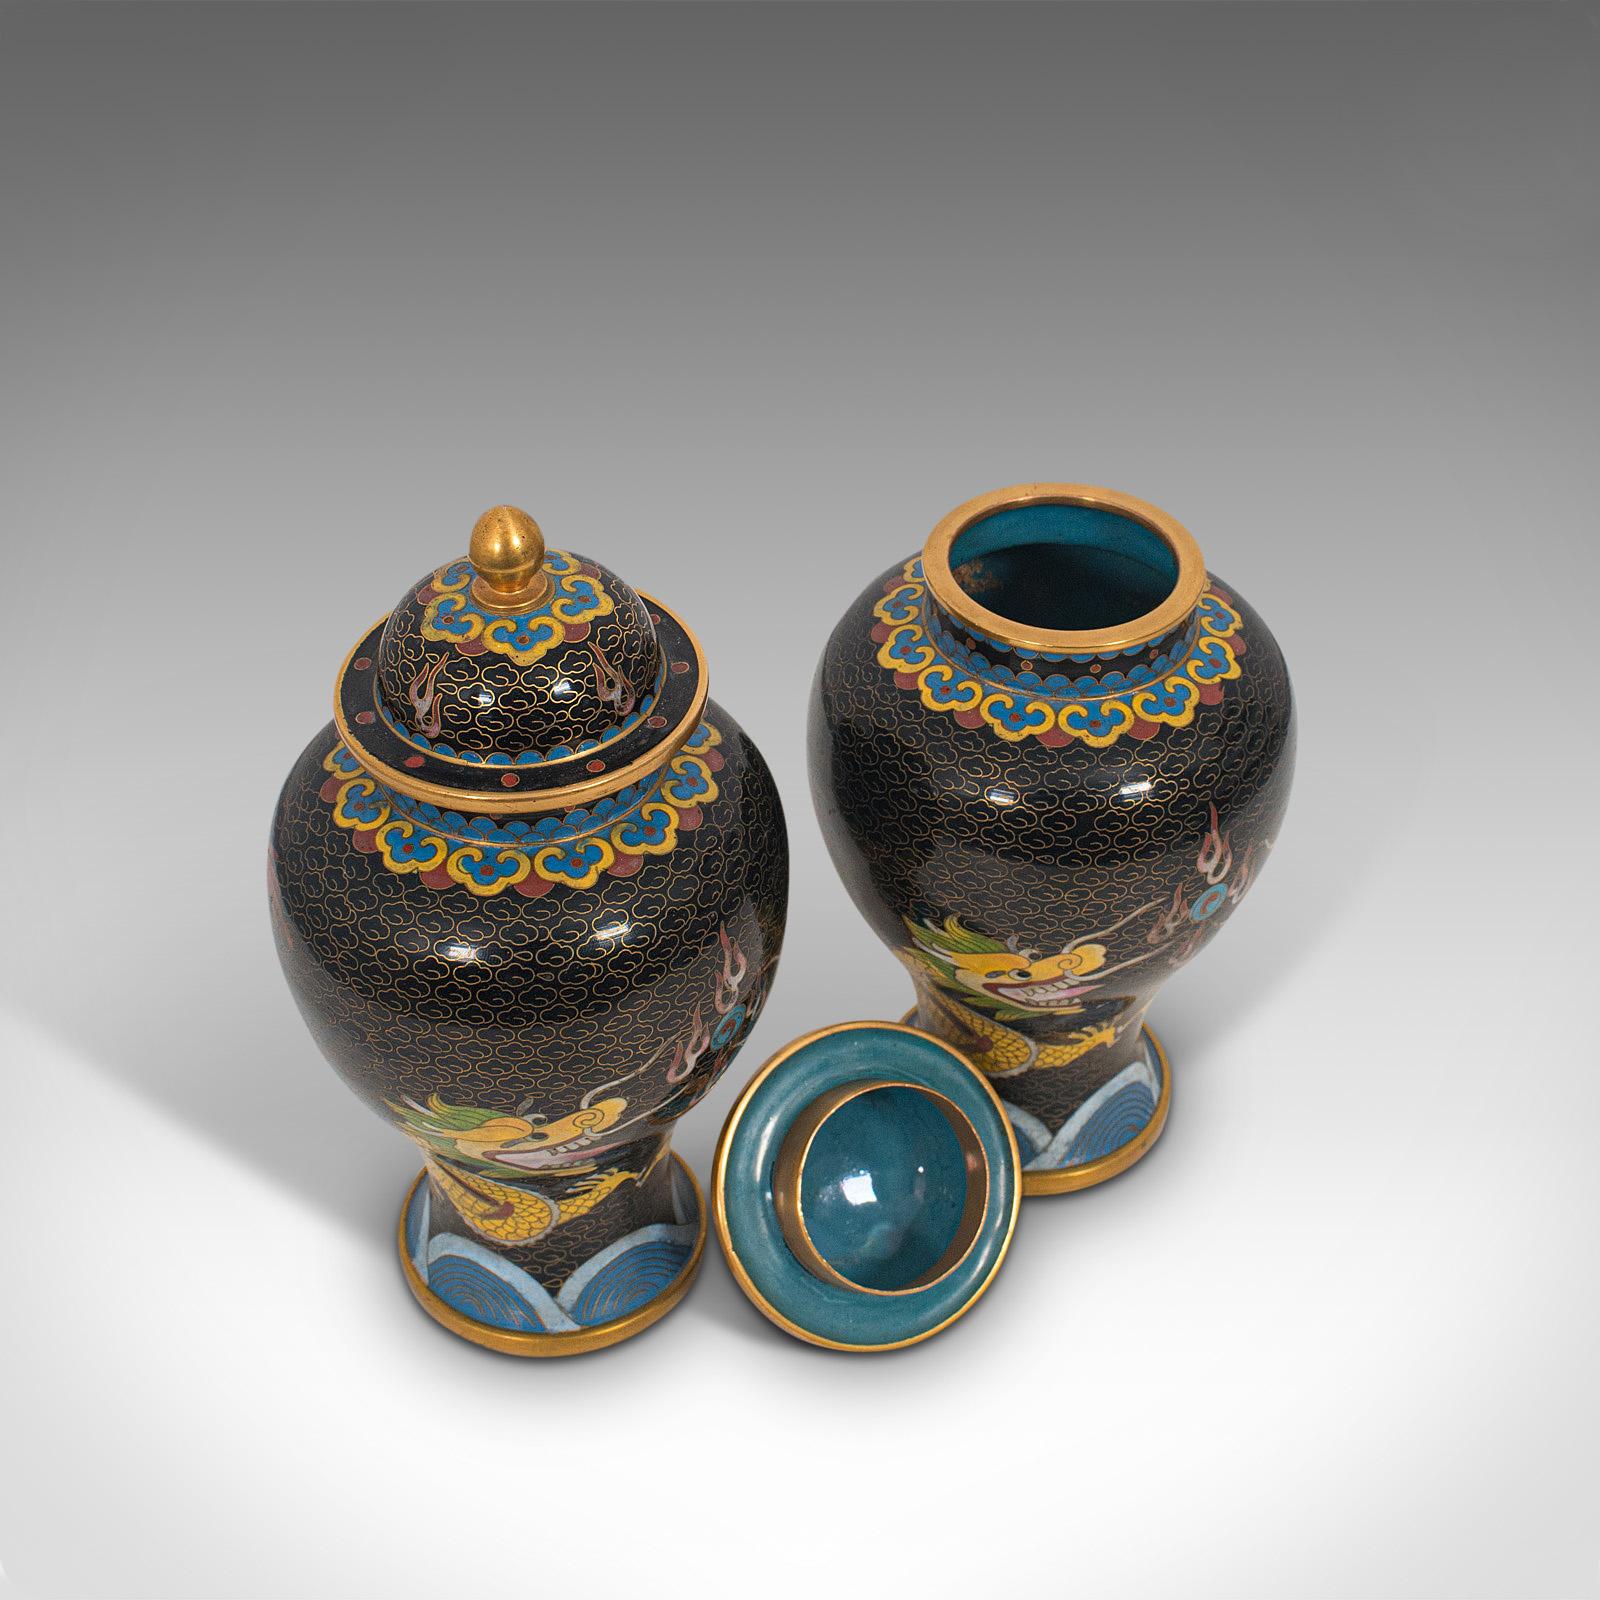 Antique Decorative Spice Jars, Chinese, Cloisonné, Baluster Urn circa 1900, Pair For Sale 1